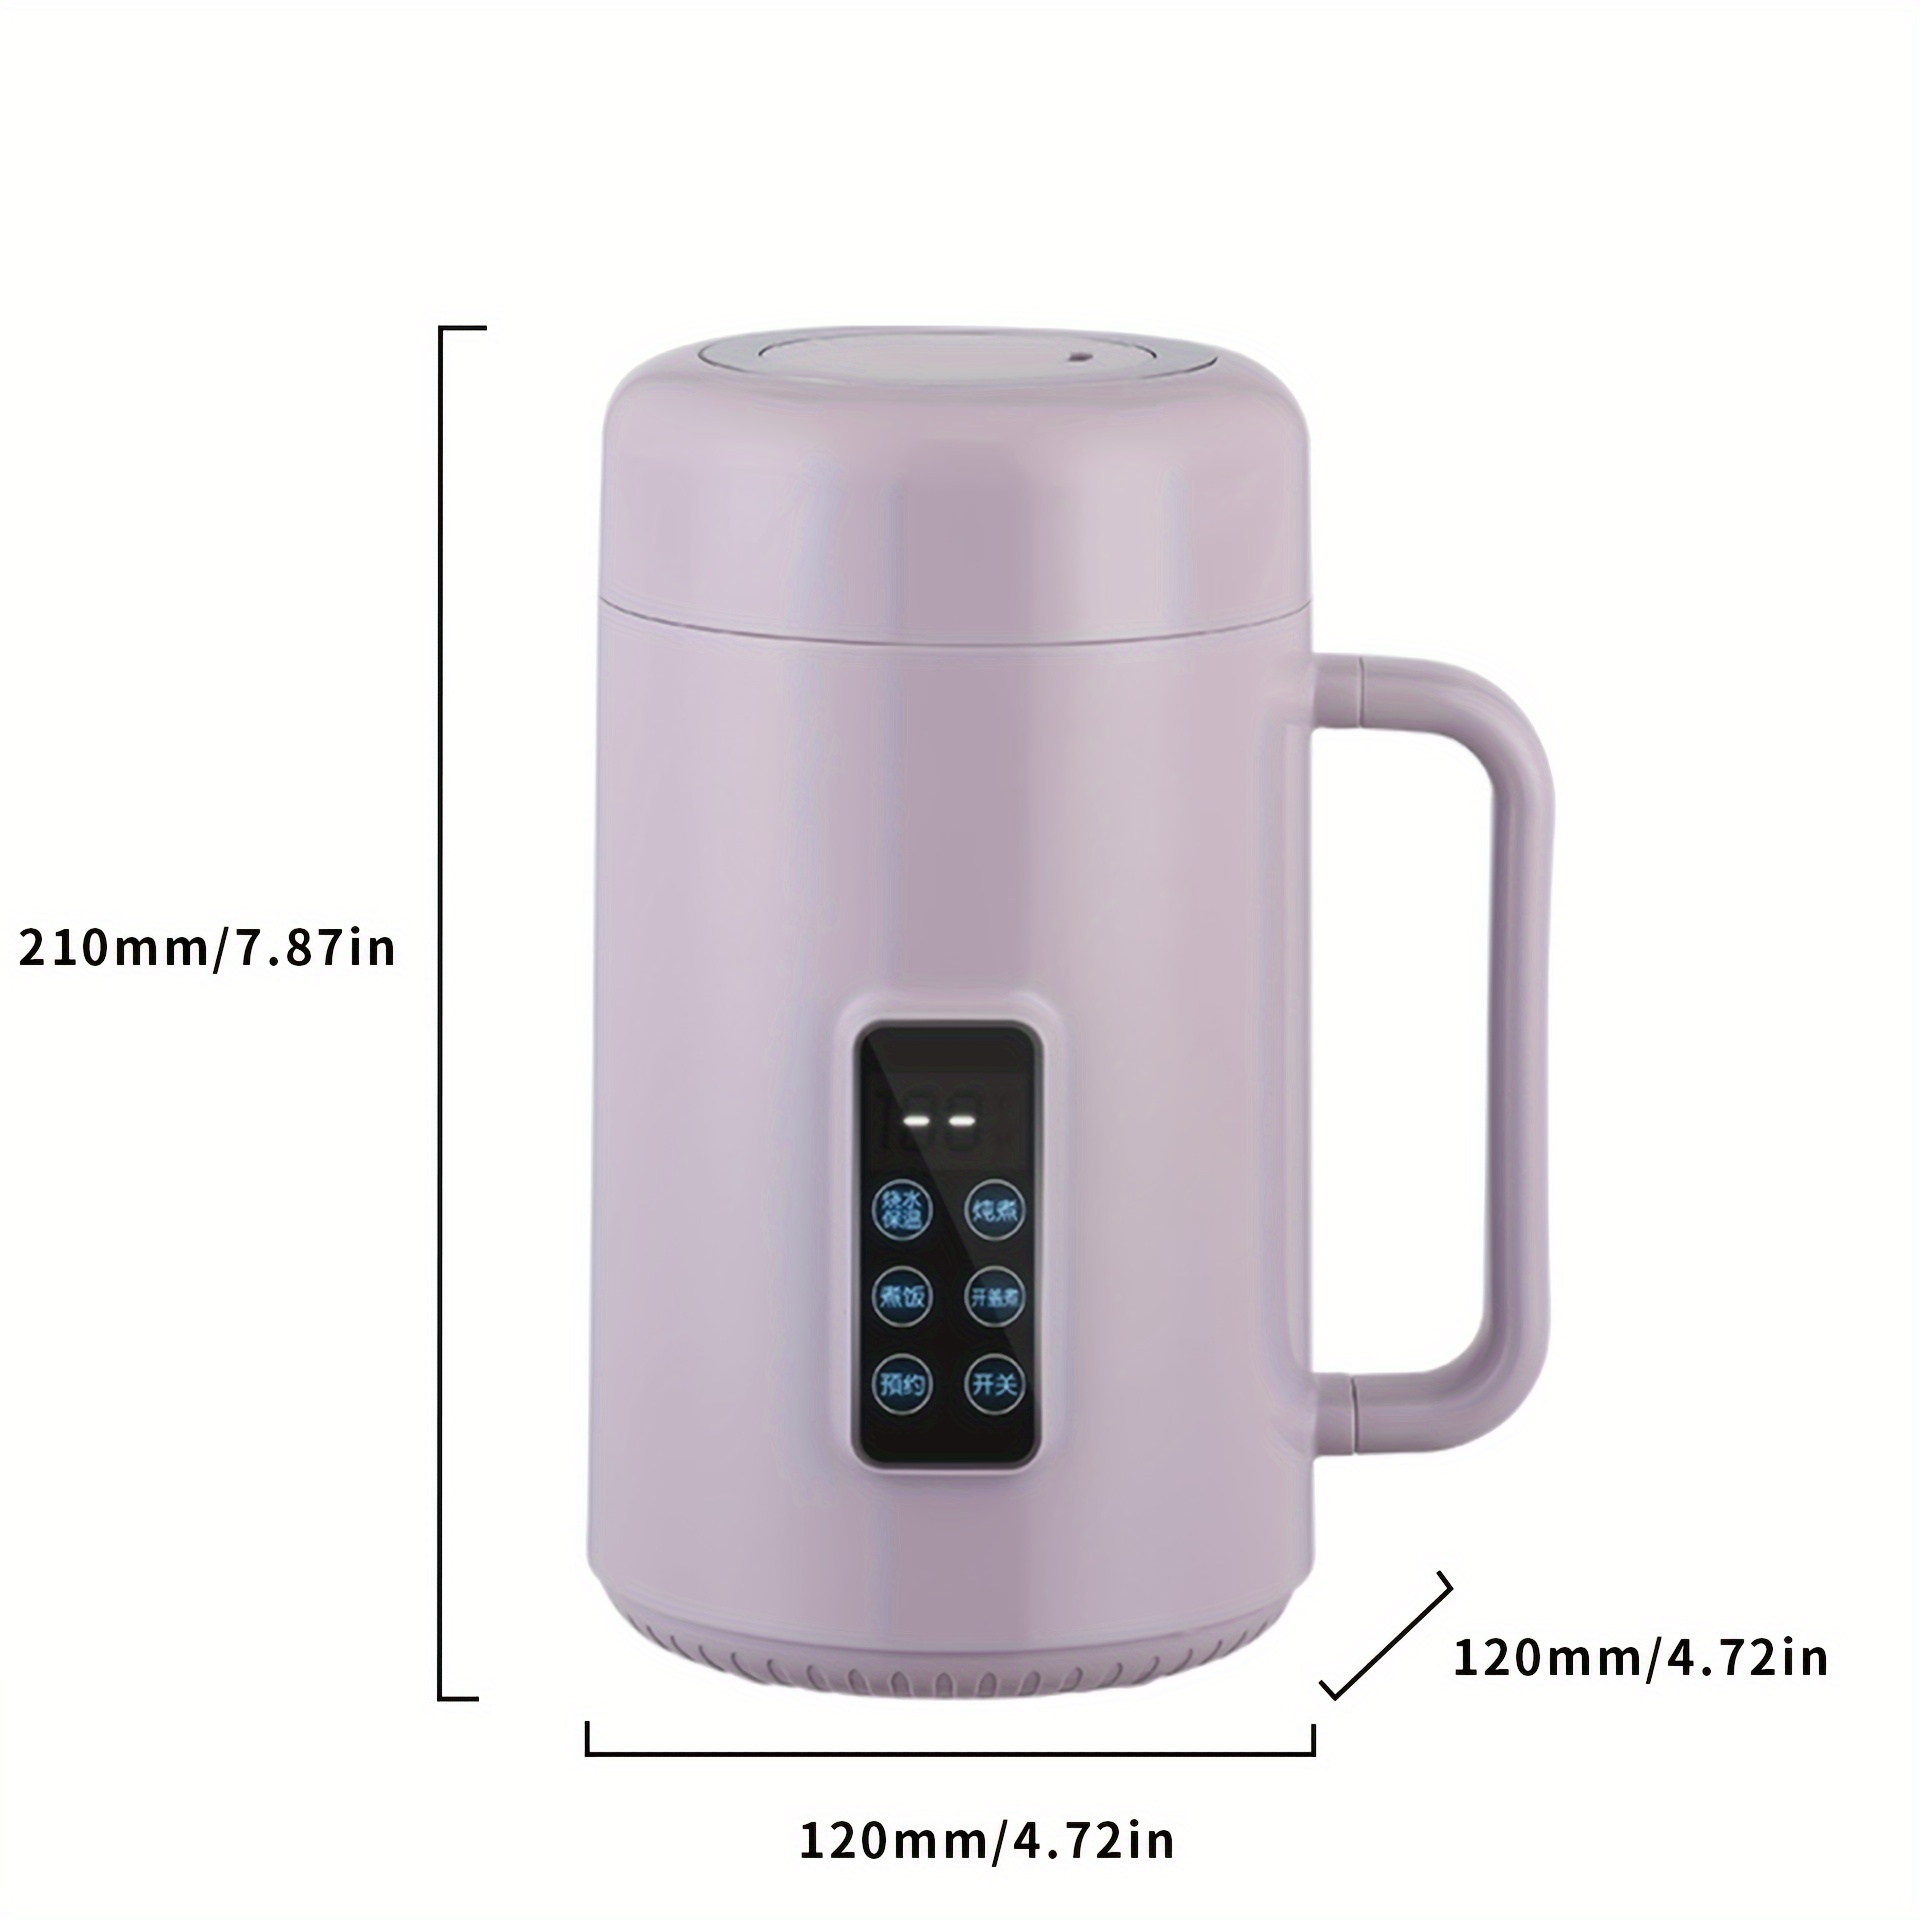 Lowest Price: iCookPot Multi-Use Electric Kettle